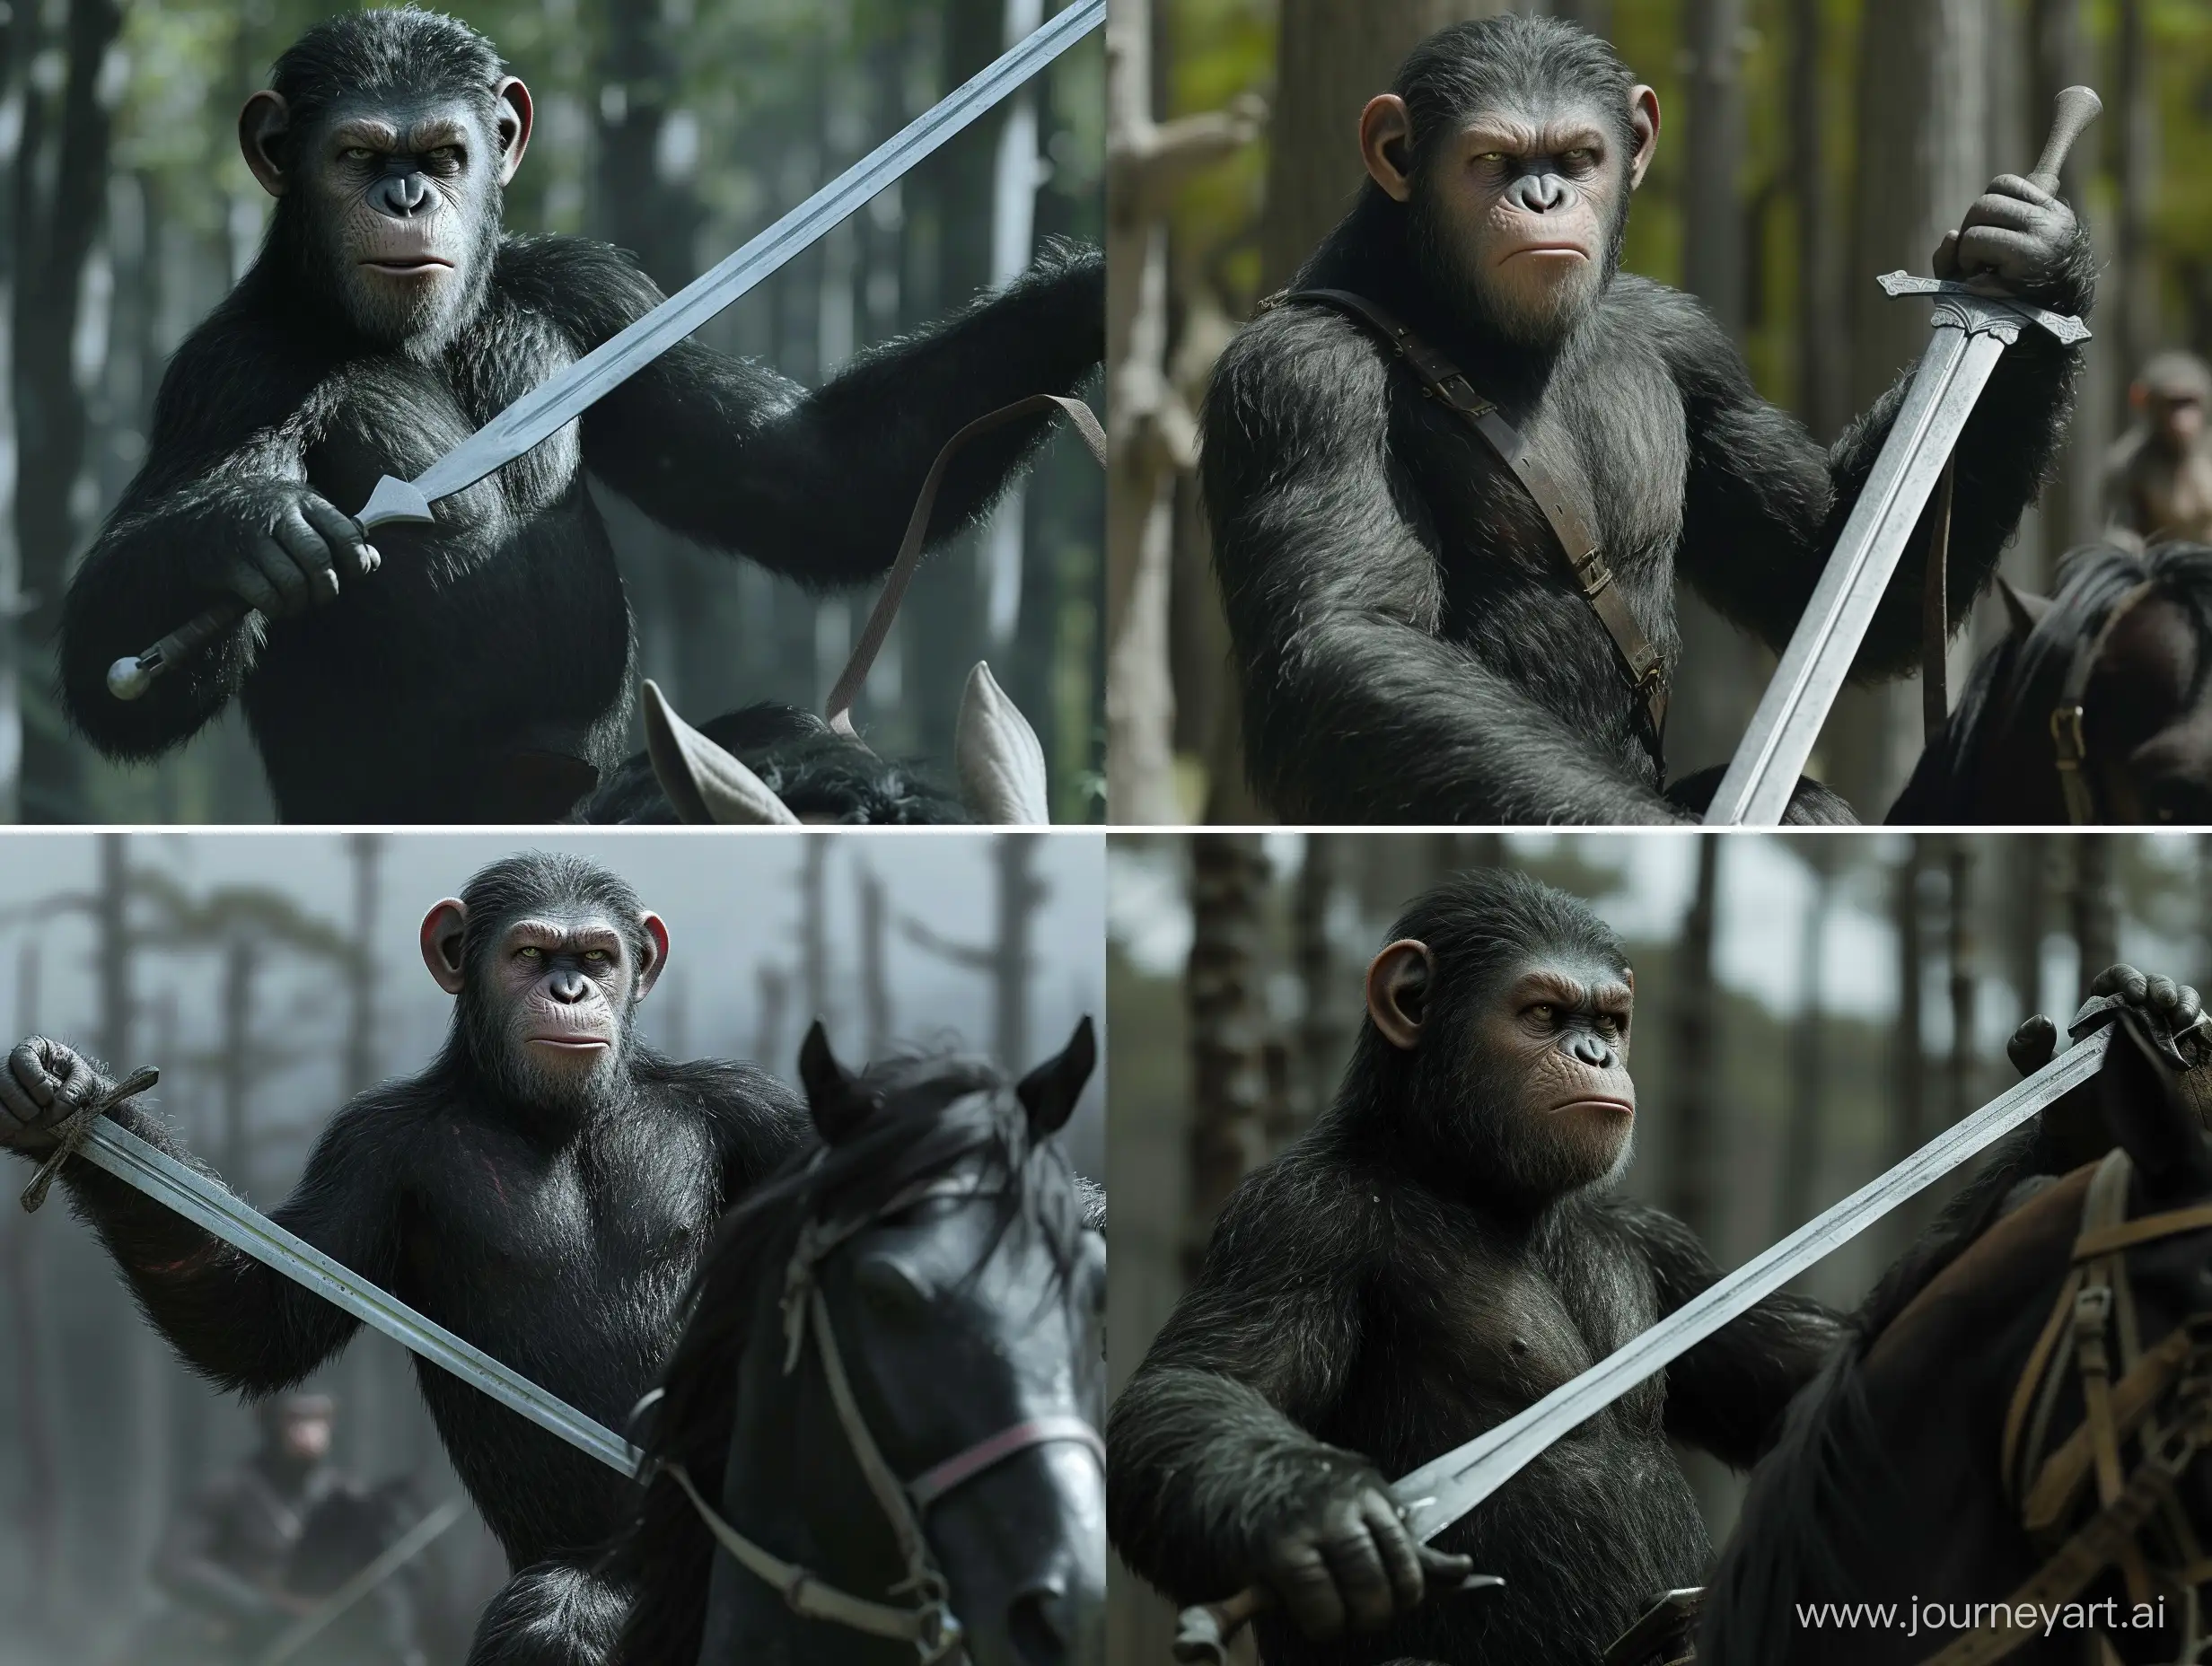 Planet of the apes movie style : a monkey is holding a sword and riding a horse in forest